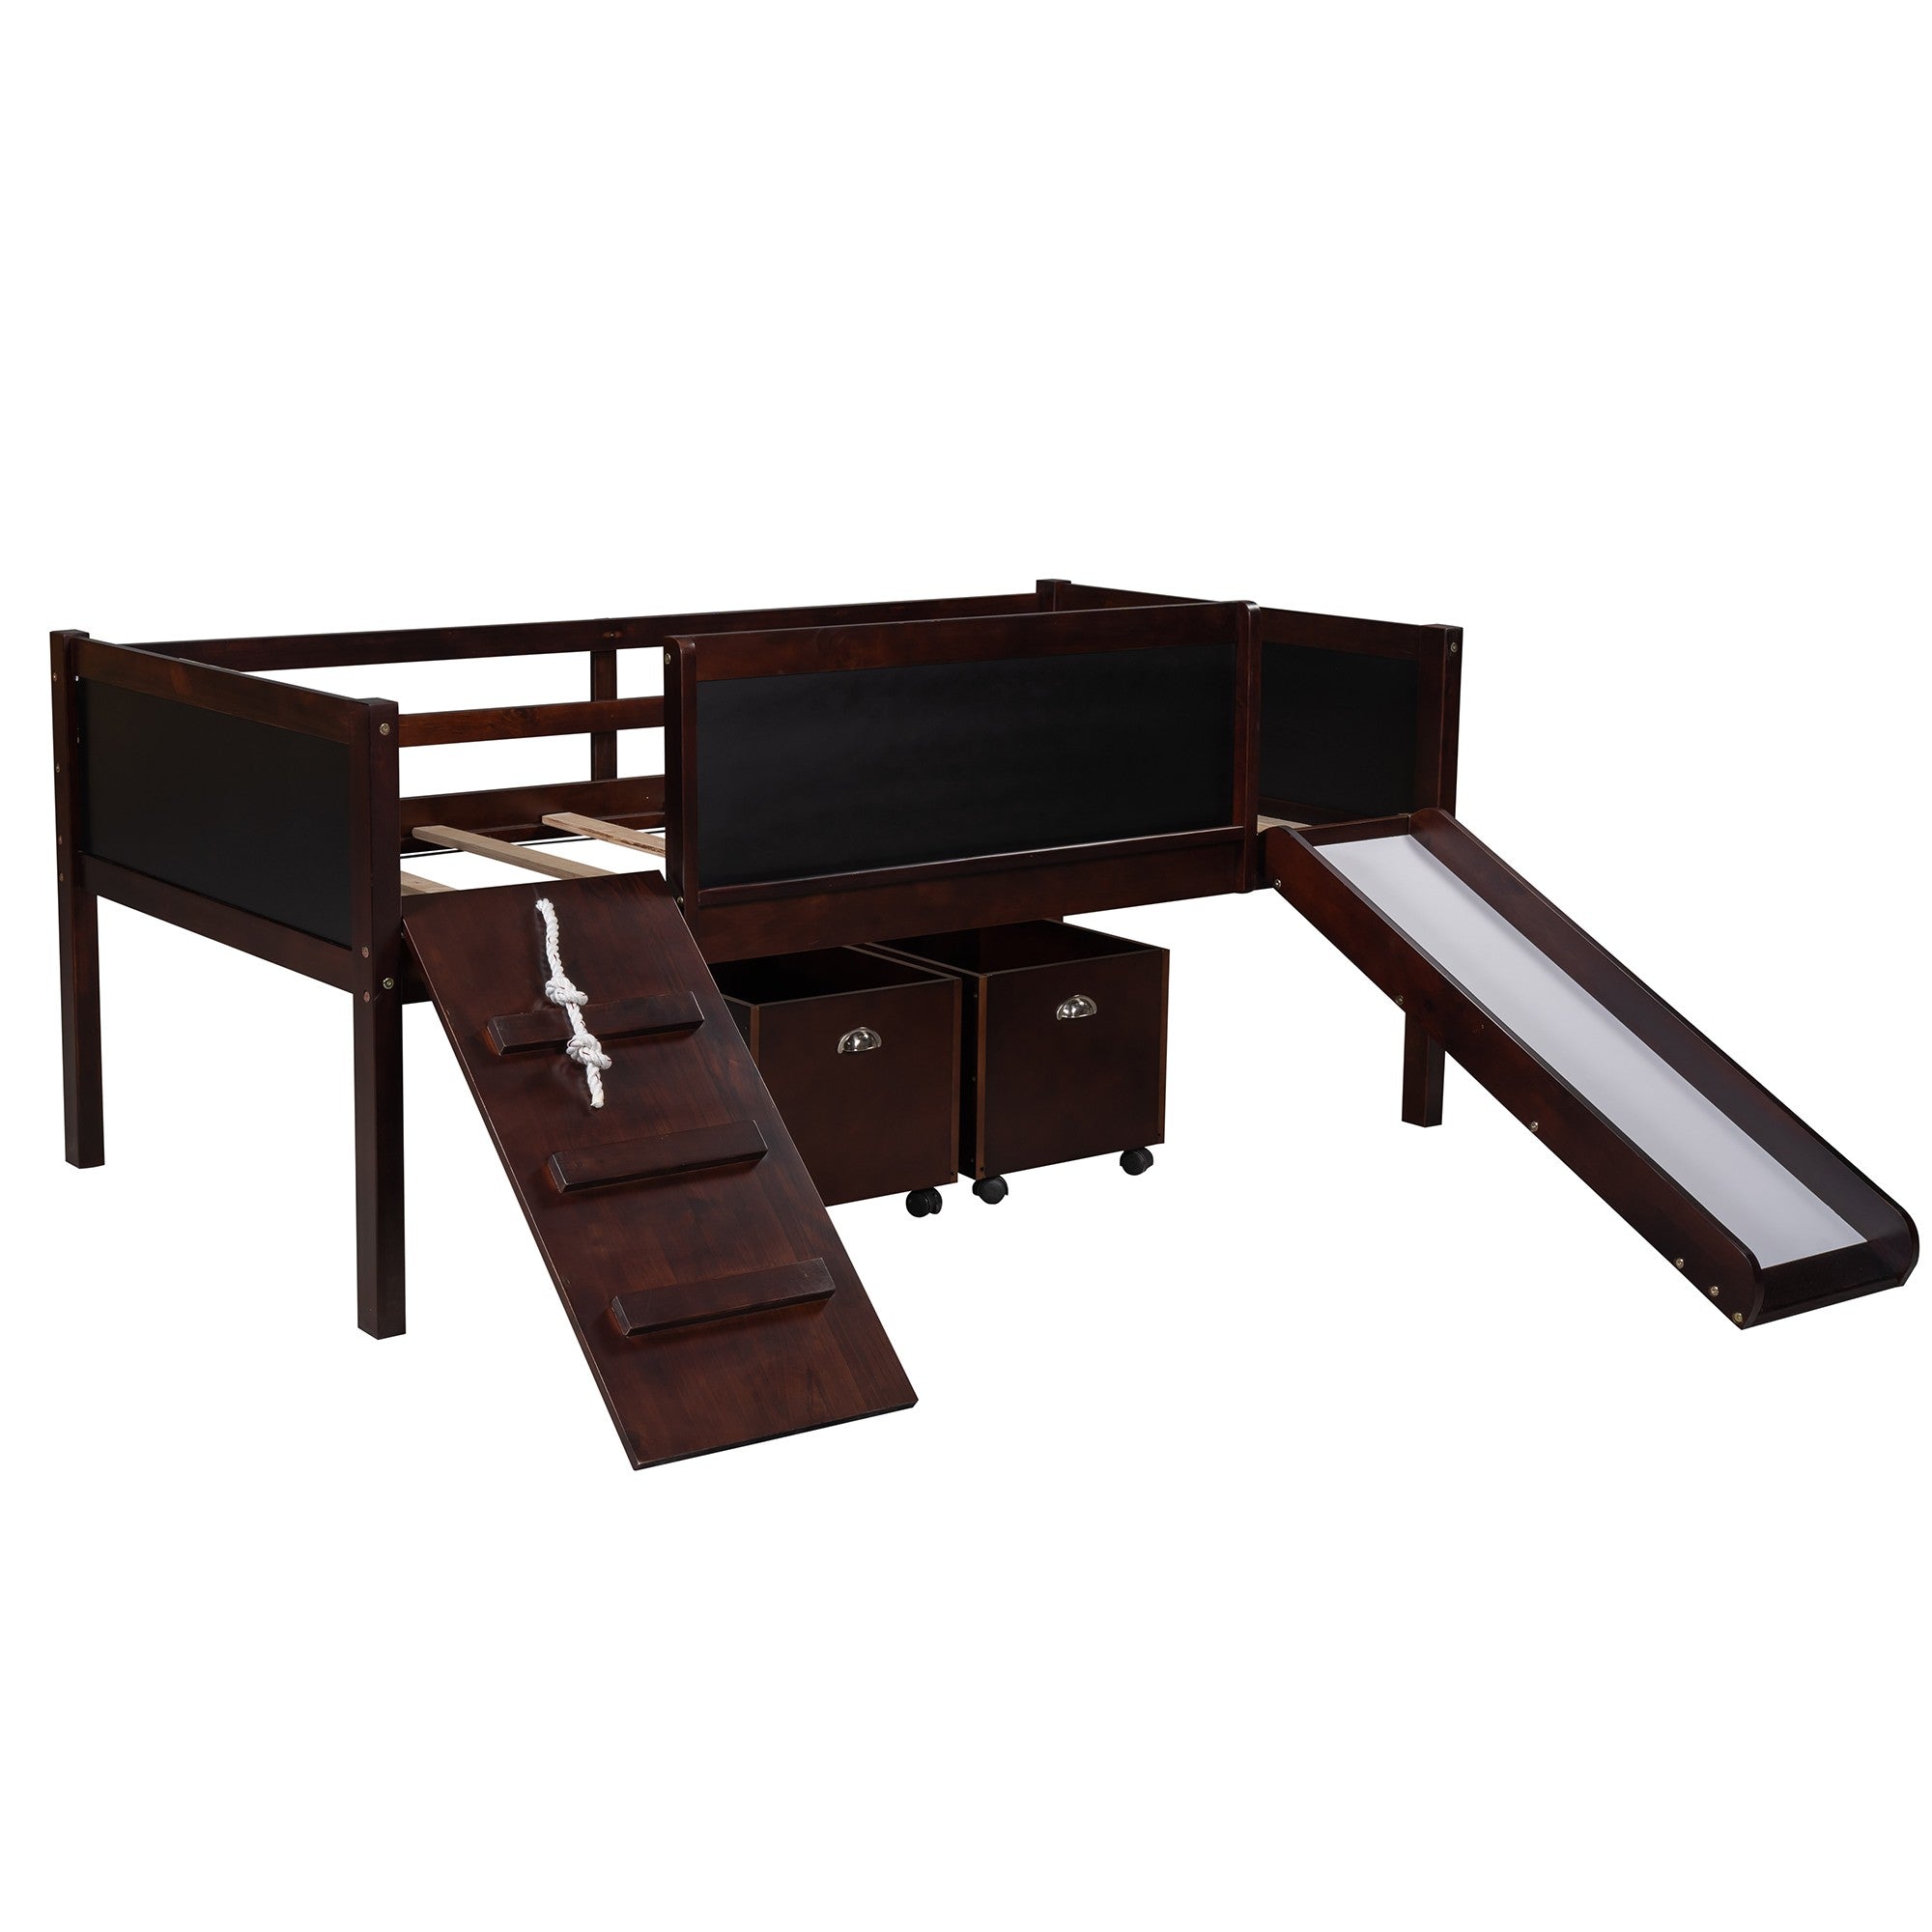 Climbing Frame Dark Brown Twin Size Loft Bed with Slide and Storage Boxes - Tuesday Morning-Loft Beds